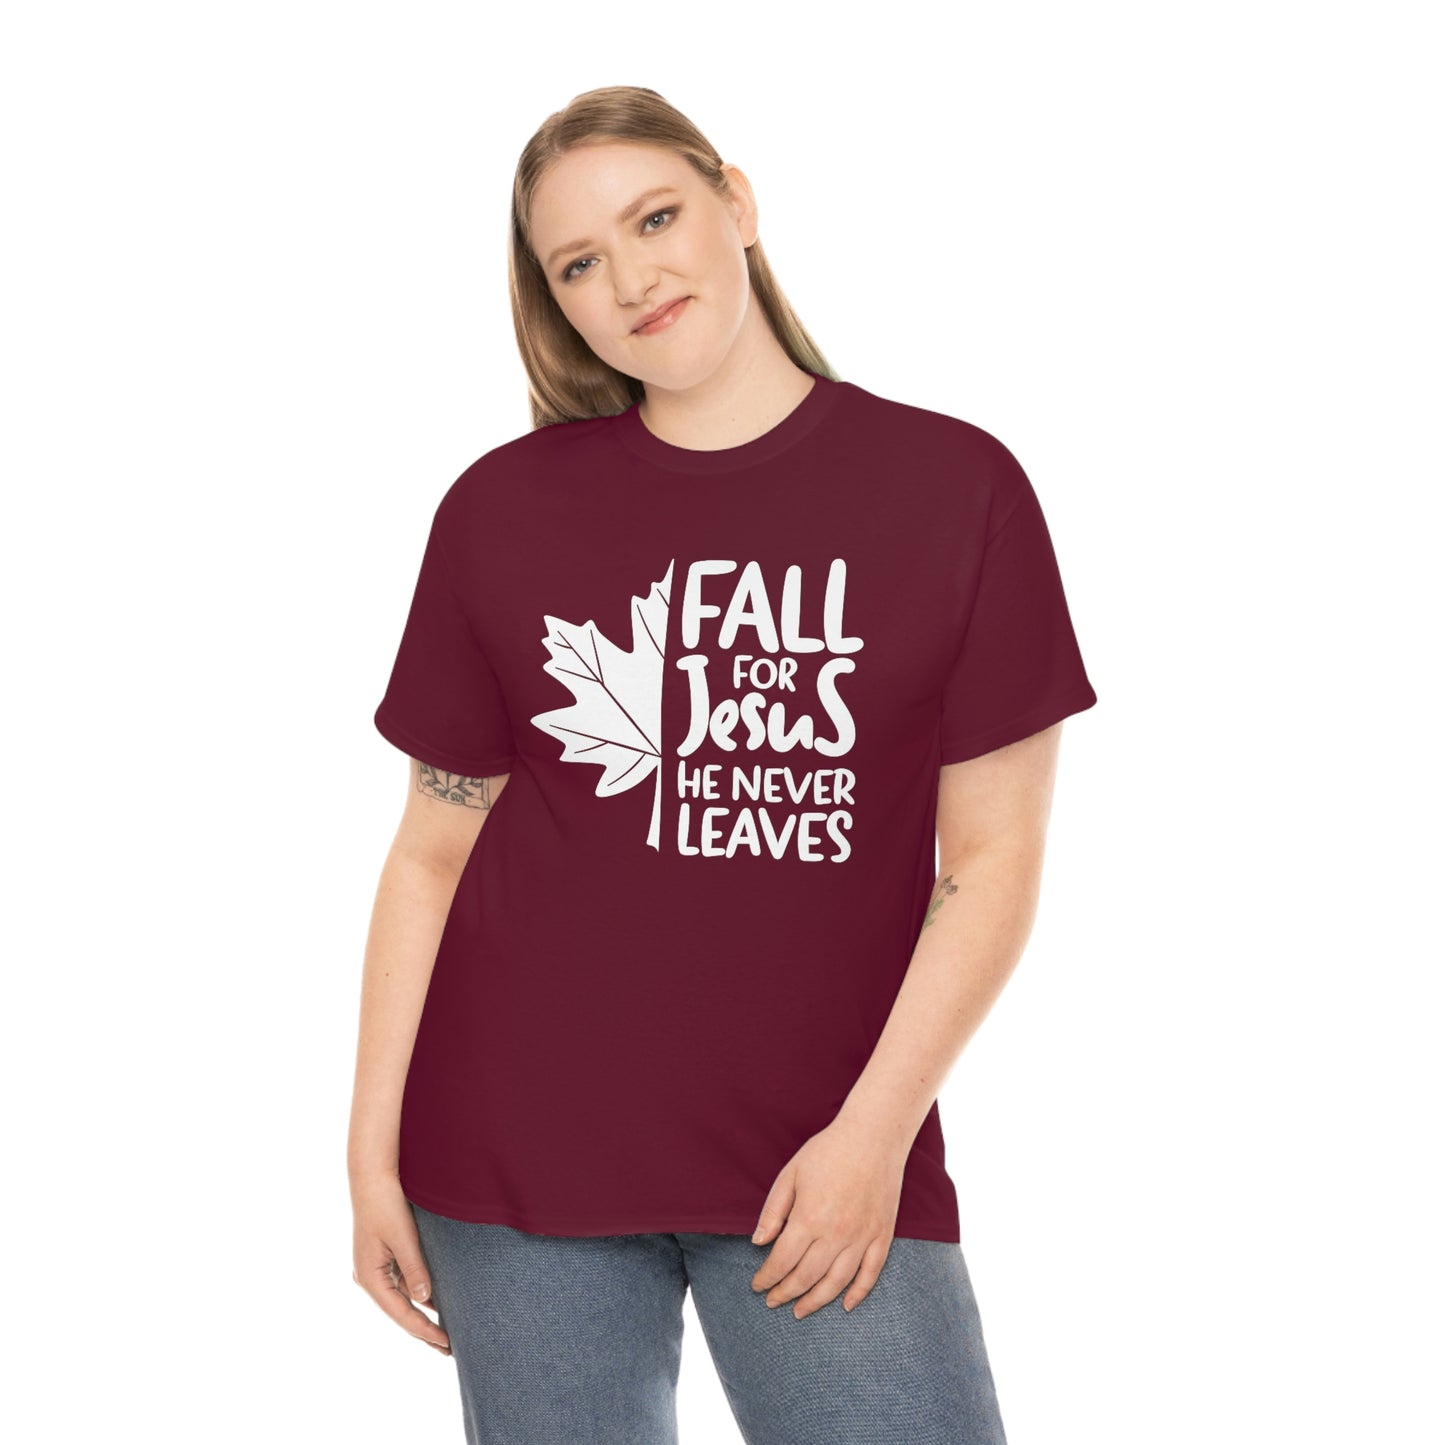 Fall for Jesus 2022